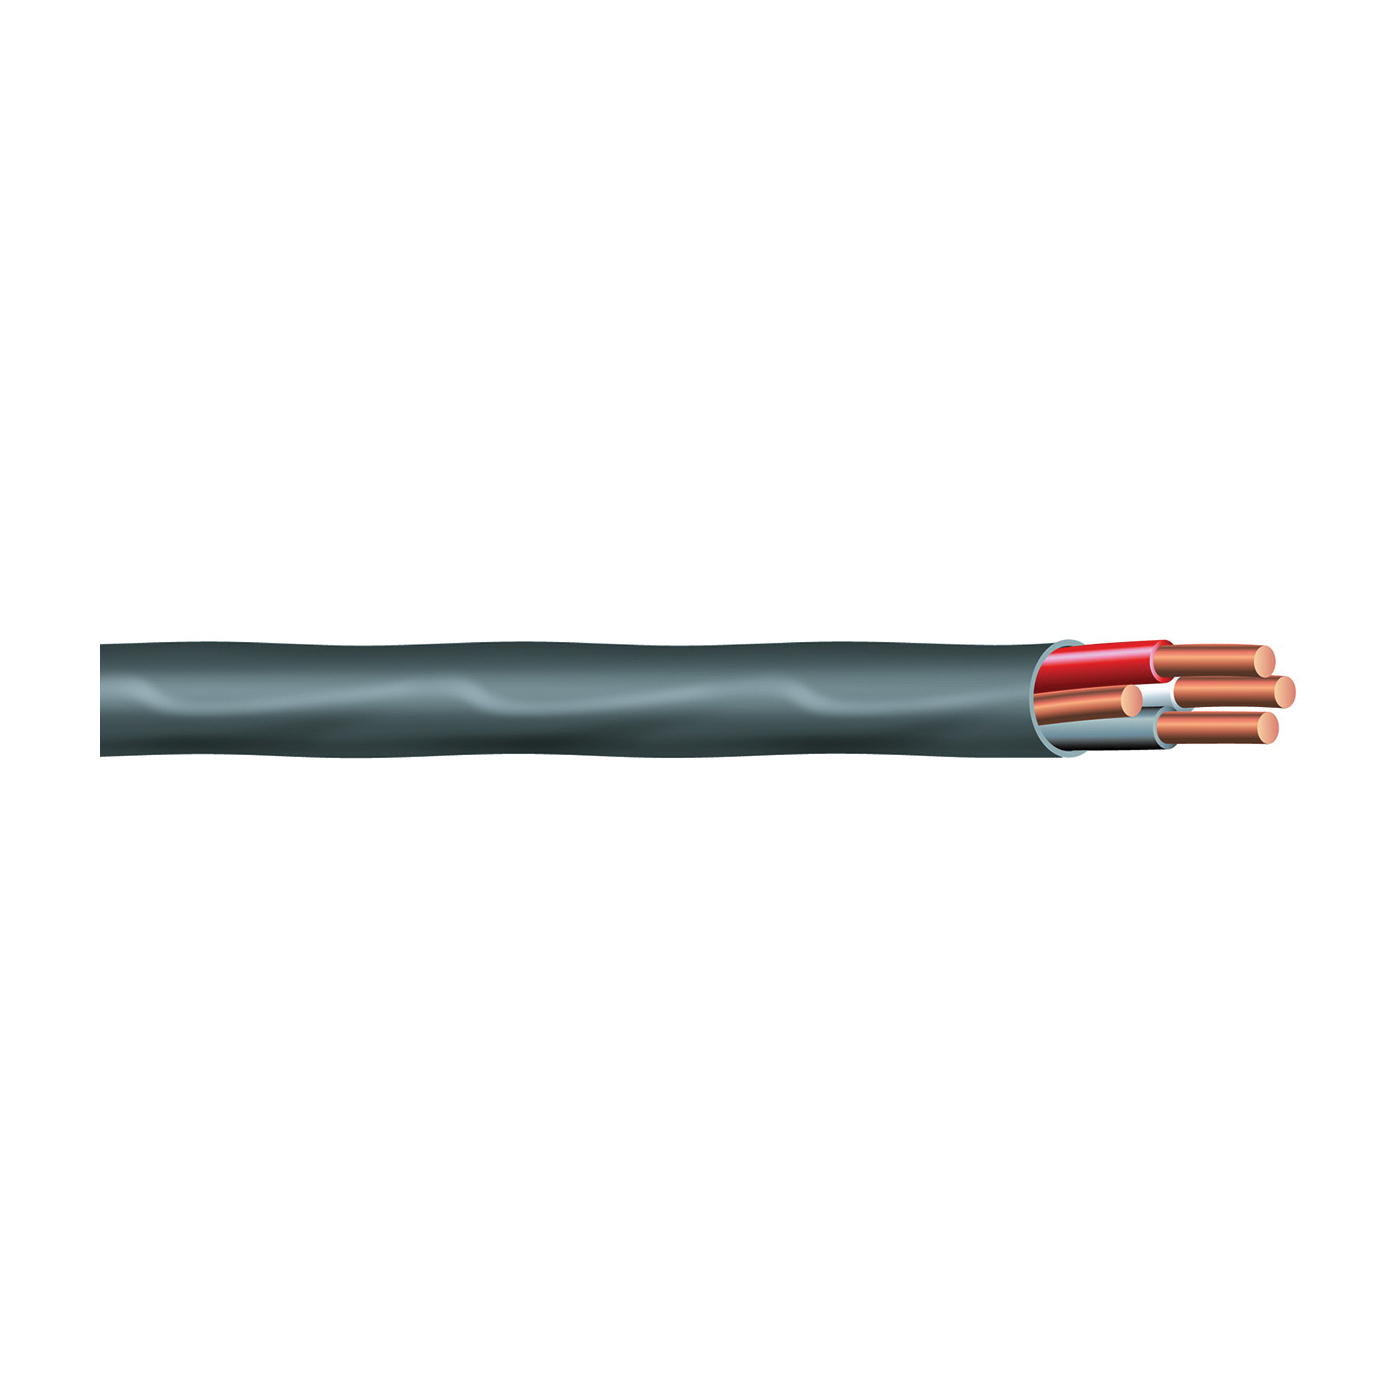 63950032 Sheathed Cable, 6 AWG Wire, 3 -Conductor, 50 ft L, Copper Conductor, PVC Insulation